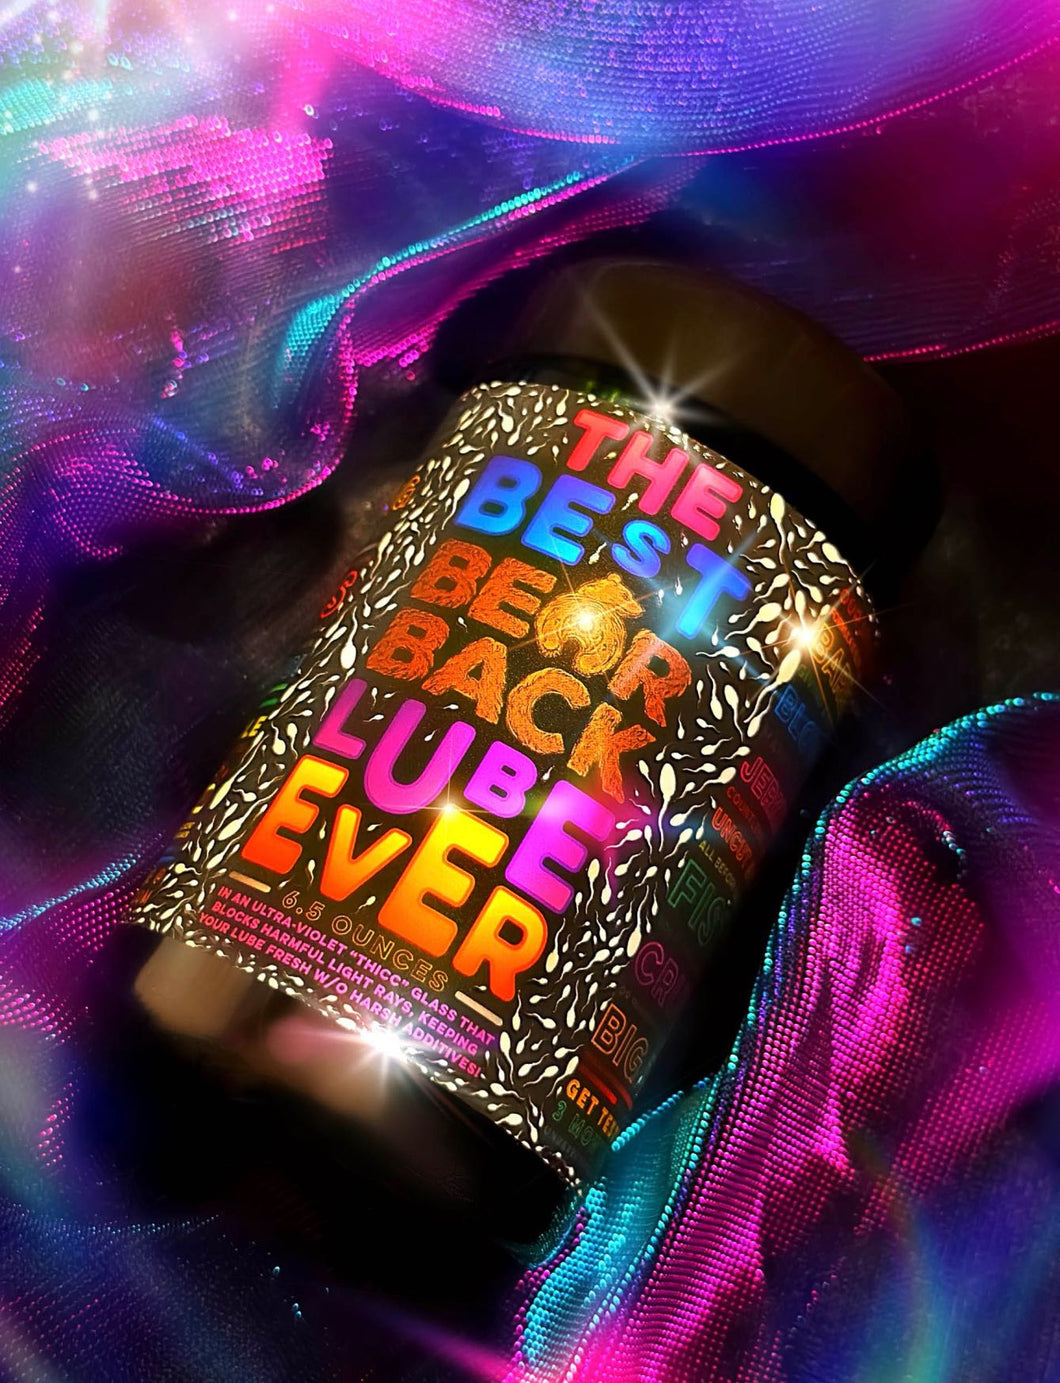 The Best Bearback Lube Ever (XL Size - 6.5oz)